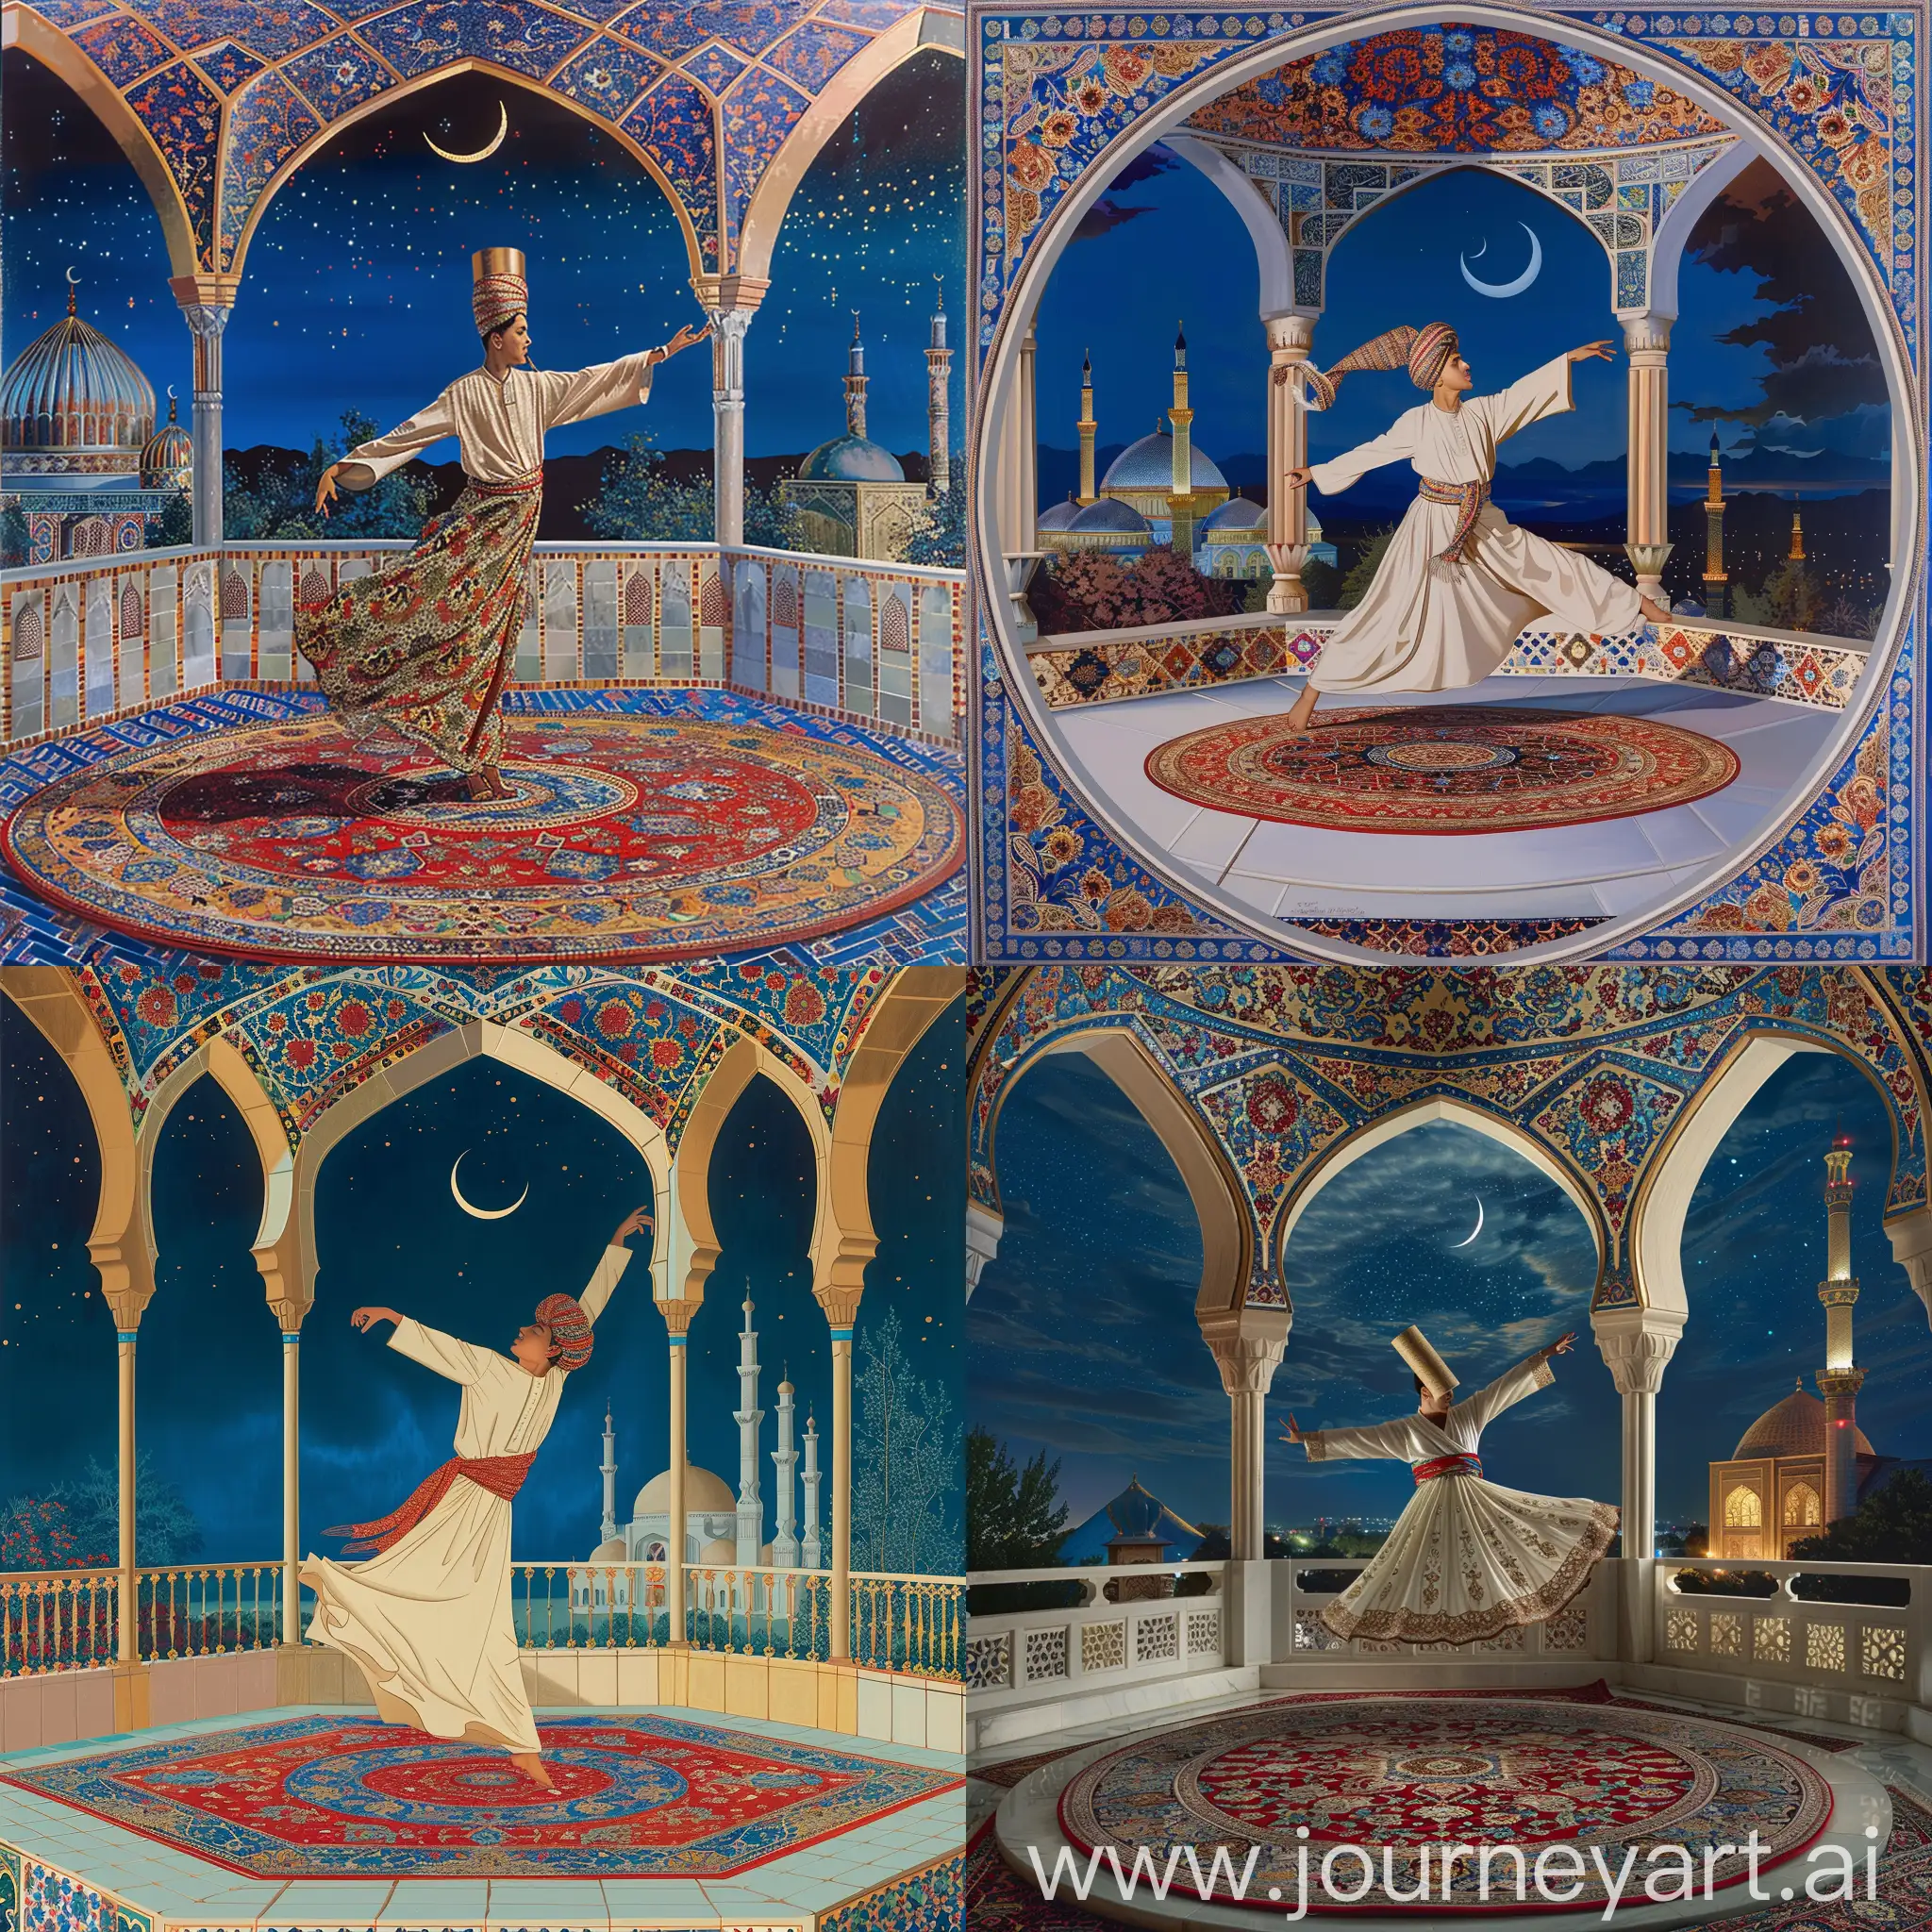 A young British dervish wearing cylindrical fez cap performing sufi whirling sema dance on a persian carpet, inside an octagonal balcony having three arches decorated with red blue gold persian floral motifs, serene night sky with a crescent, view of Persian tiled mosque, White blue red golden composition --sref <https://cdn.discordapp.com/attachments/1213041174428782623/1223222044104069191/IMG_20240326_220808.png?ex=665c4dcd&is=665afc4d&hm=6bf196b26583990d01392b5caa7275c6a6890faeaf5efc85434e57eda5e43ae3&> --sw 999 --style raw --q 1 --s 999 --ar 4:5 --v 6 --ar 1:1 --no 34834